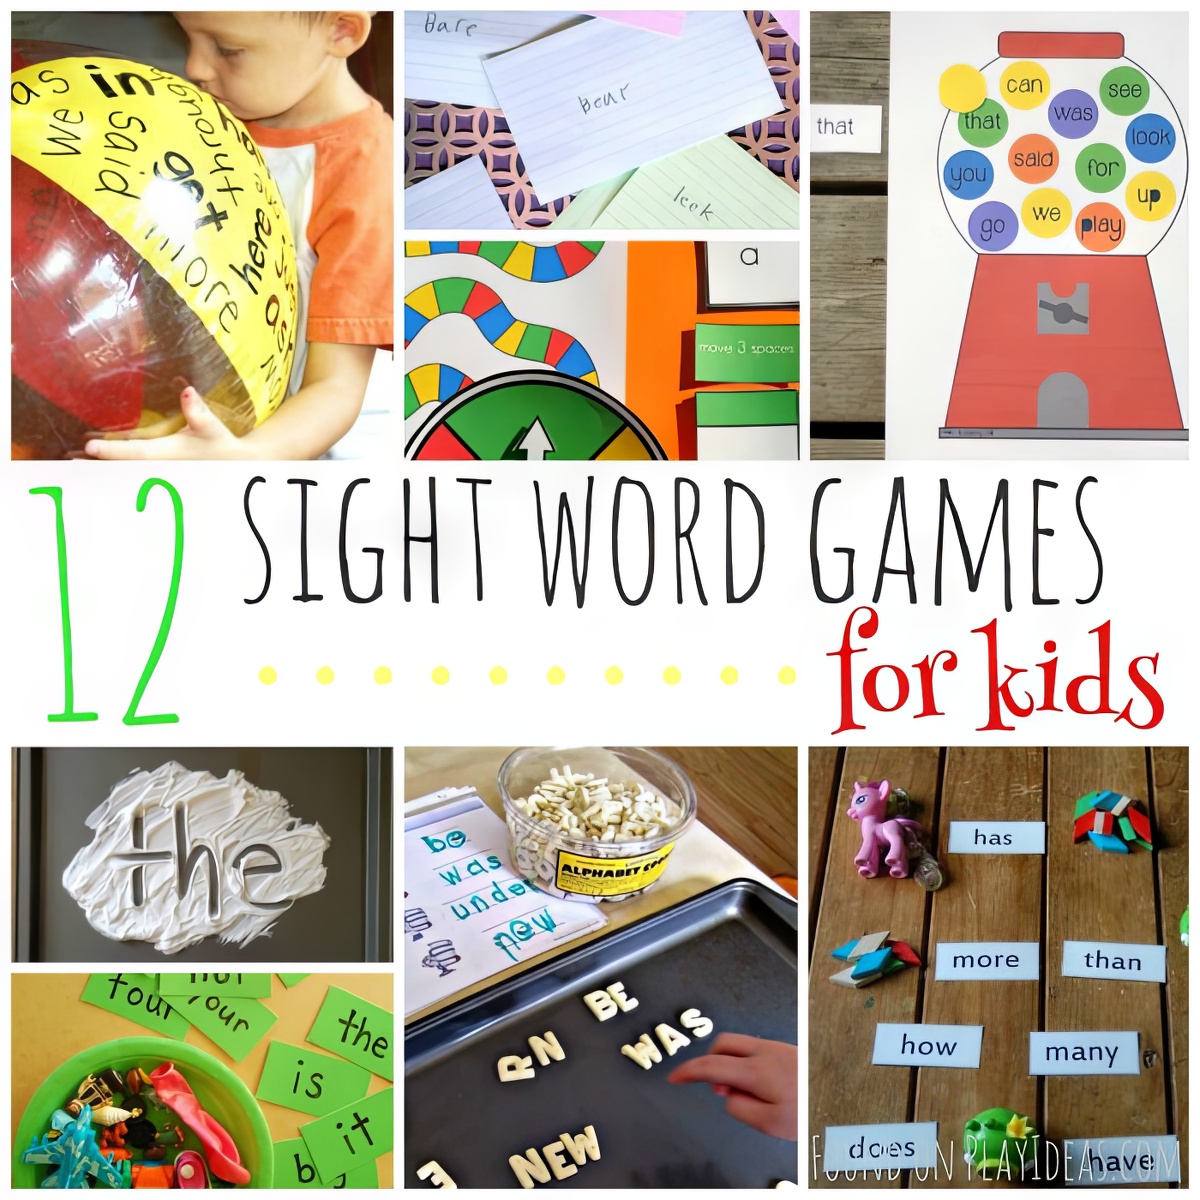 Learn and have fun with these 12 sight word game ideas for kids!